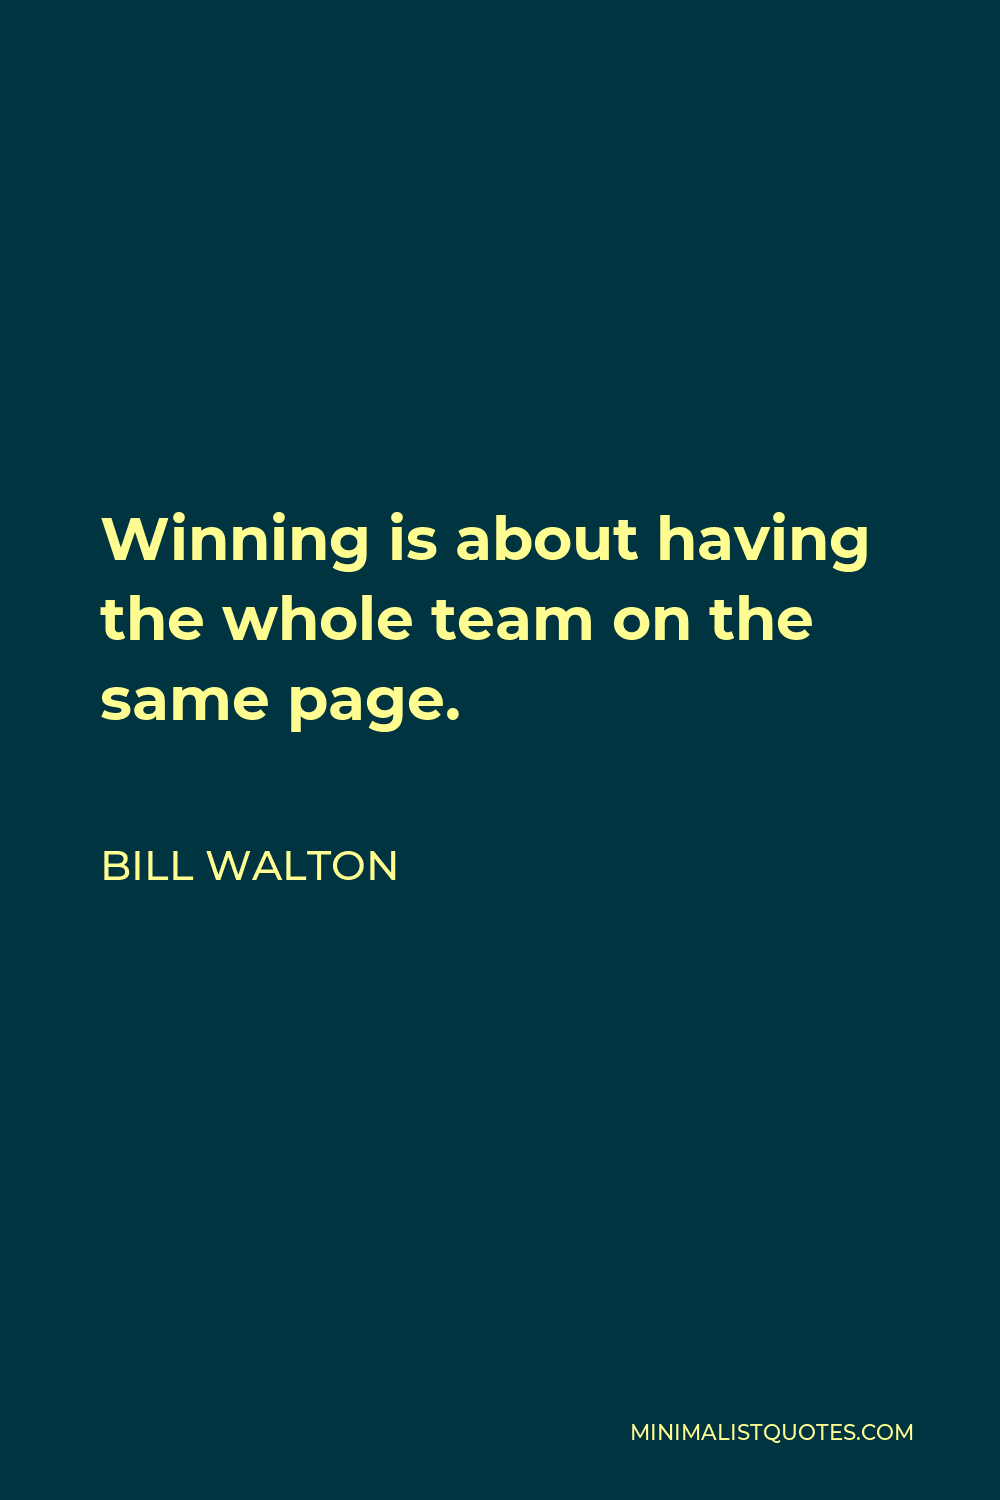 Bill Walton Quote - Winning is about having the whole team on the same page.